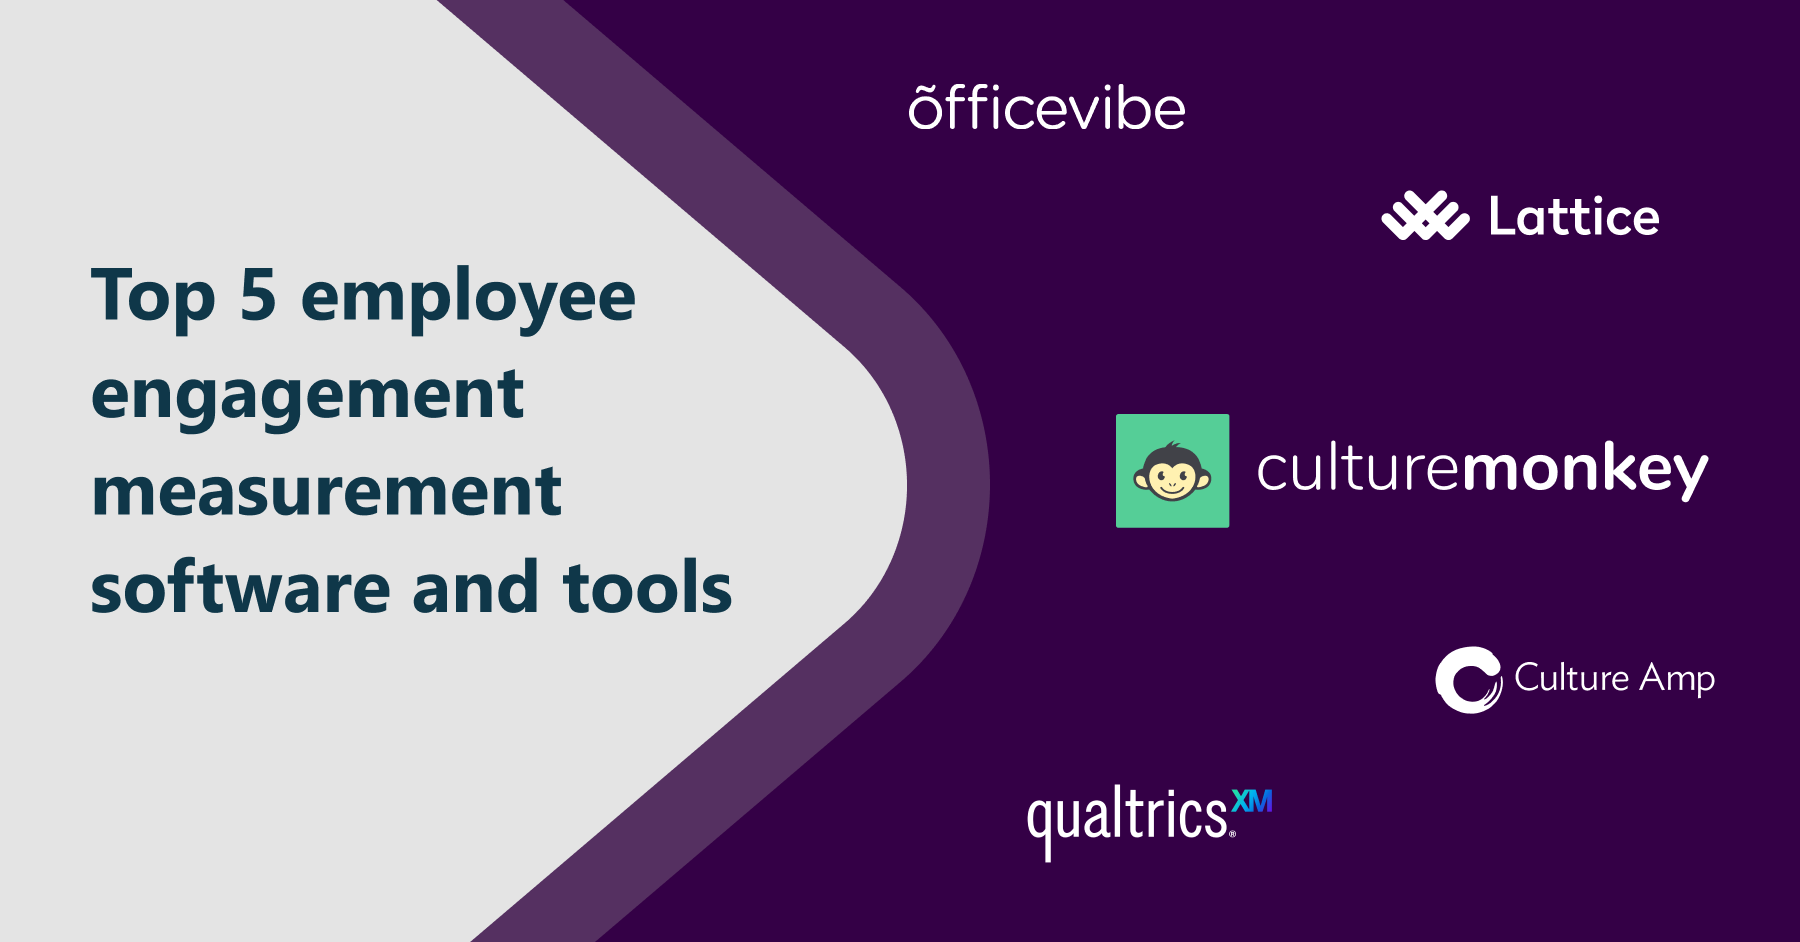 Top 5 employee engagement measurement software and tools